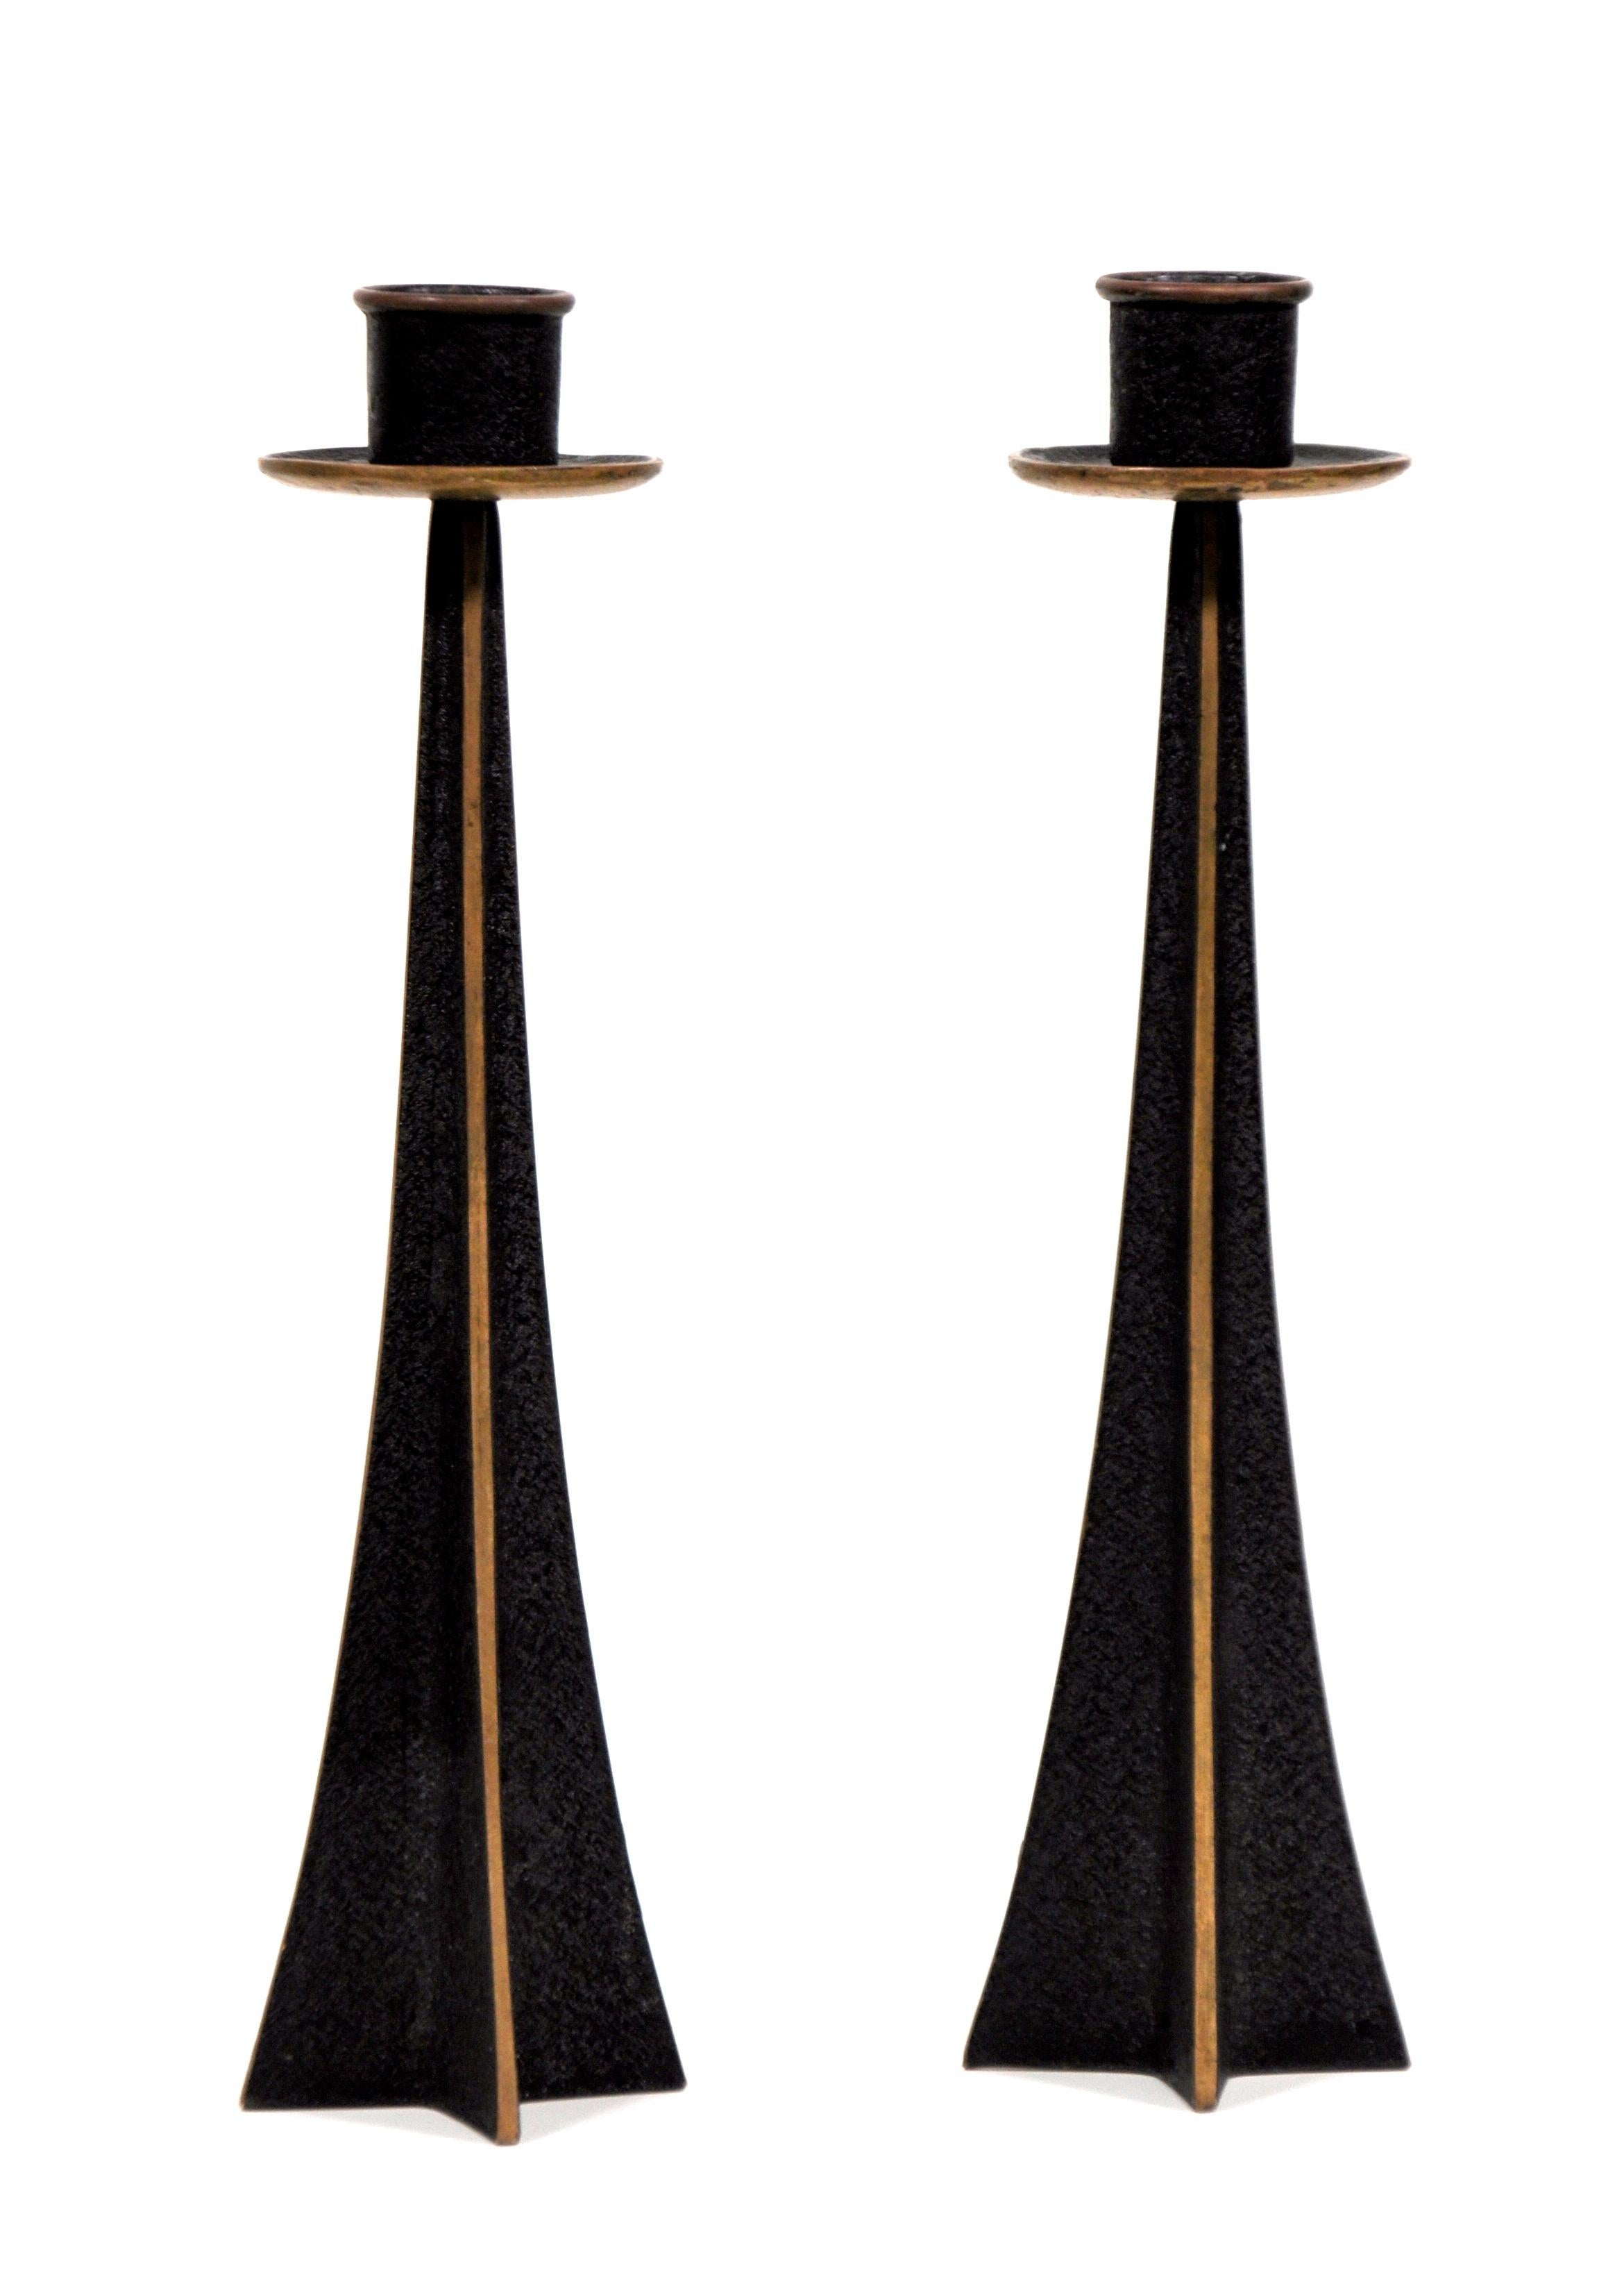 Pair of vintage midcentury Danish modern bronze candleholders of tapered stylized star, X or cross shaped body topped by a round bobeche. The metal has a black, textured finish contrasting with the gold tone of the polished borders. Work well with